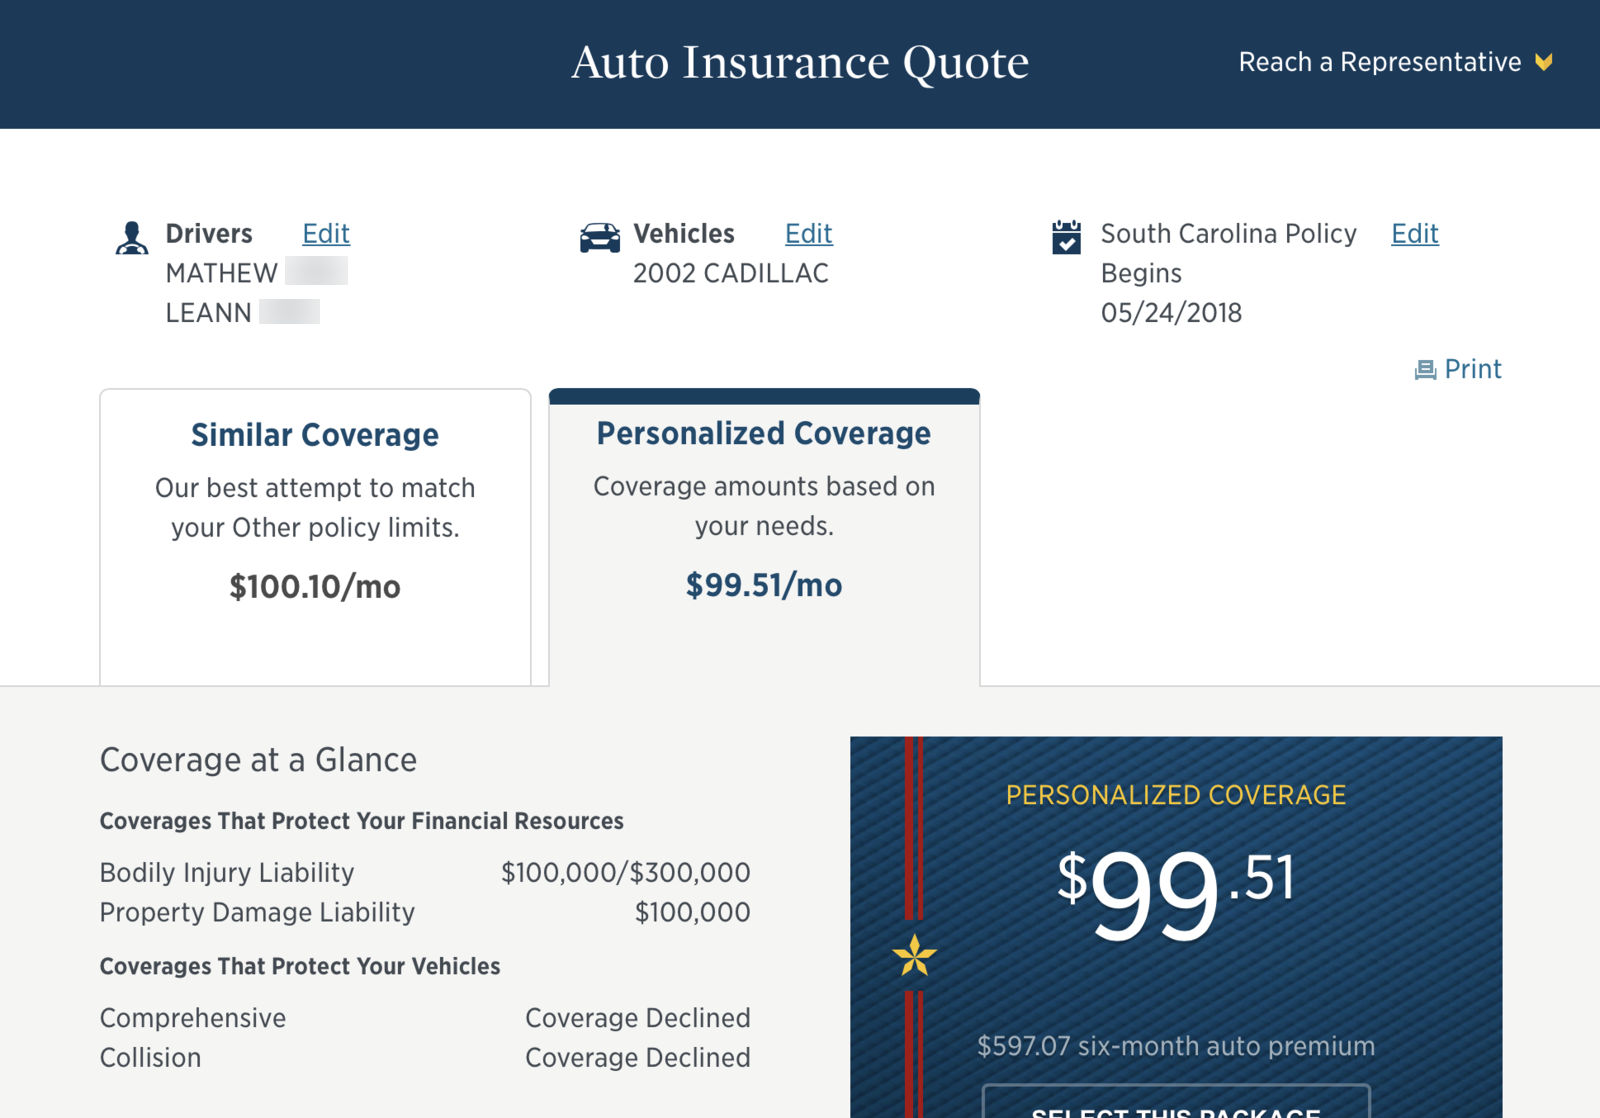 USAA quote results